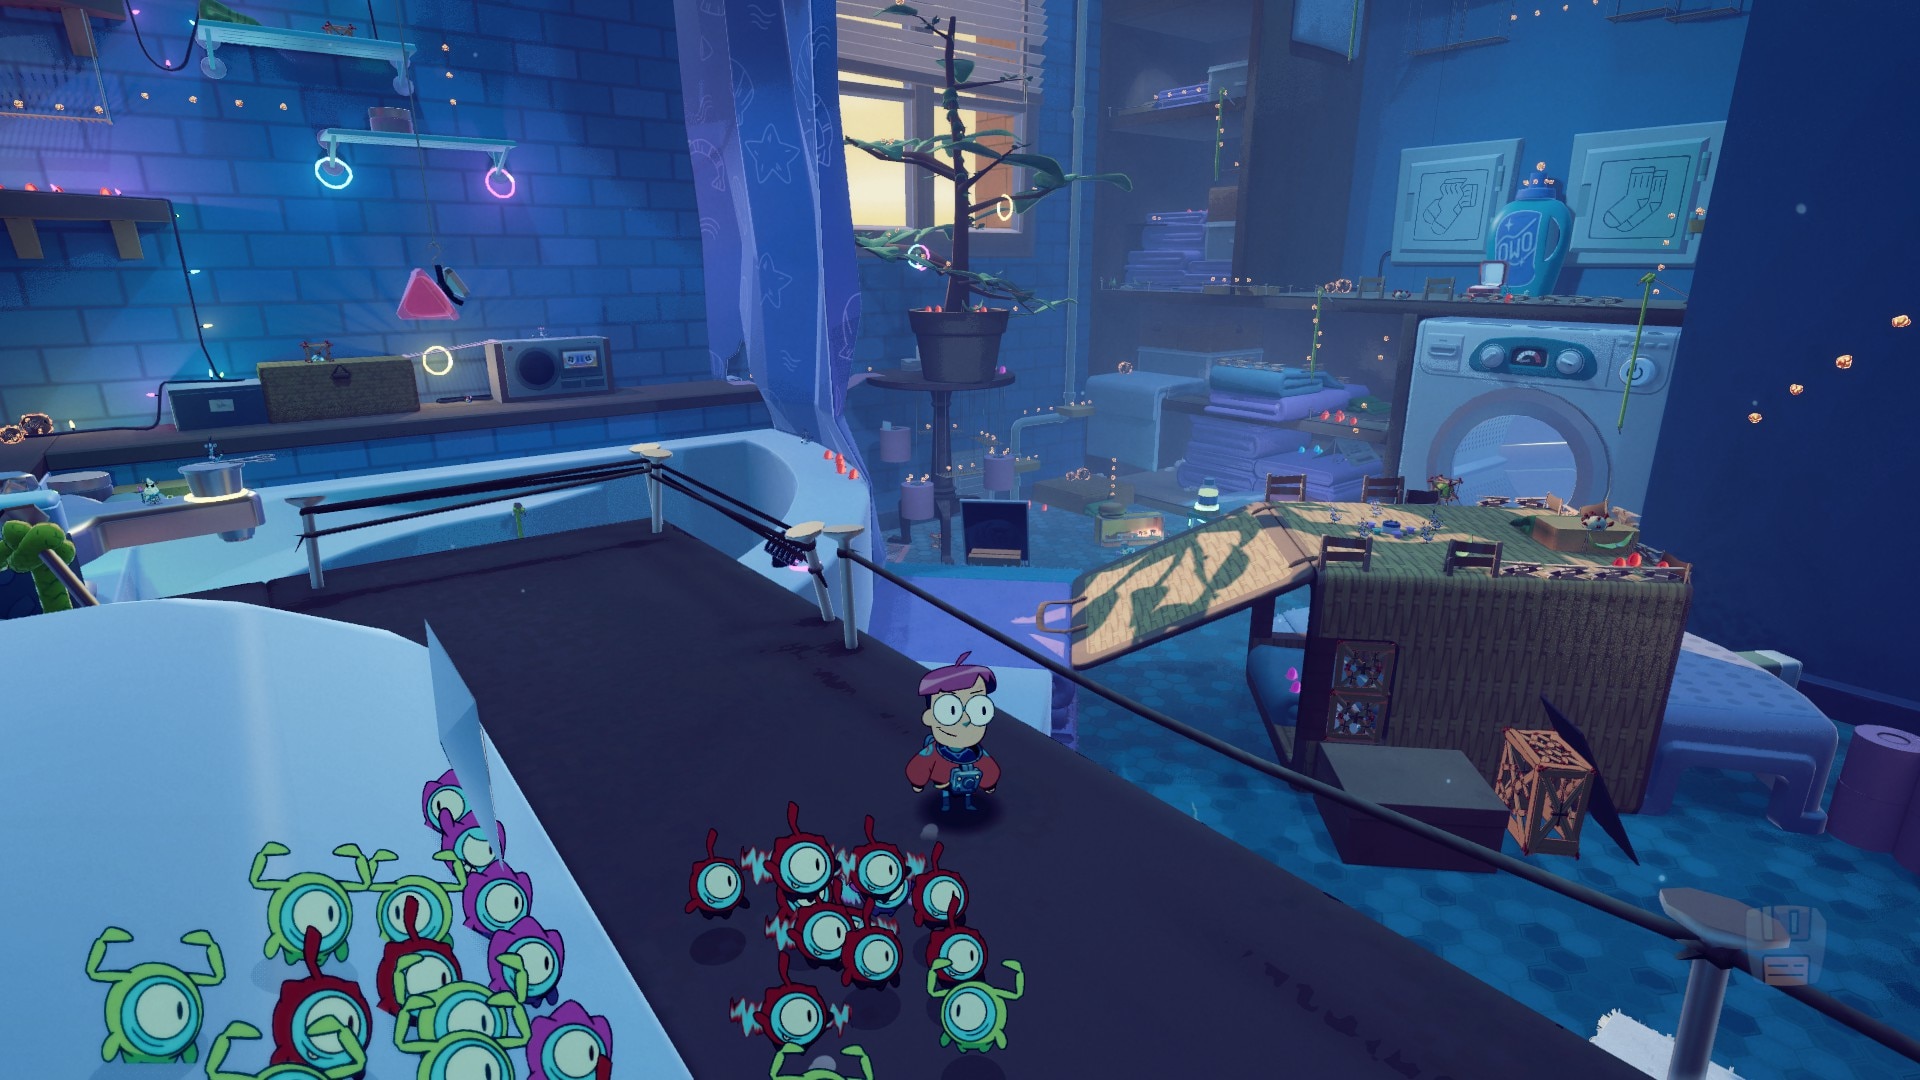 Picture: Milo is overlooking a huge bathroom area with many neon lights and collectables.